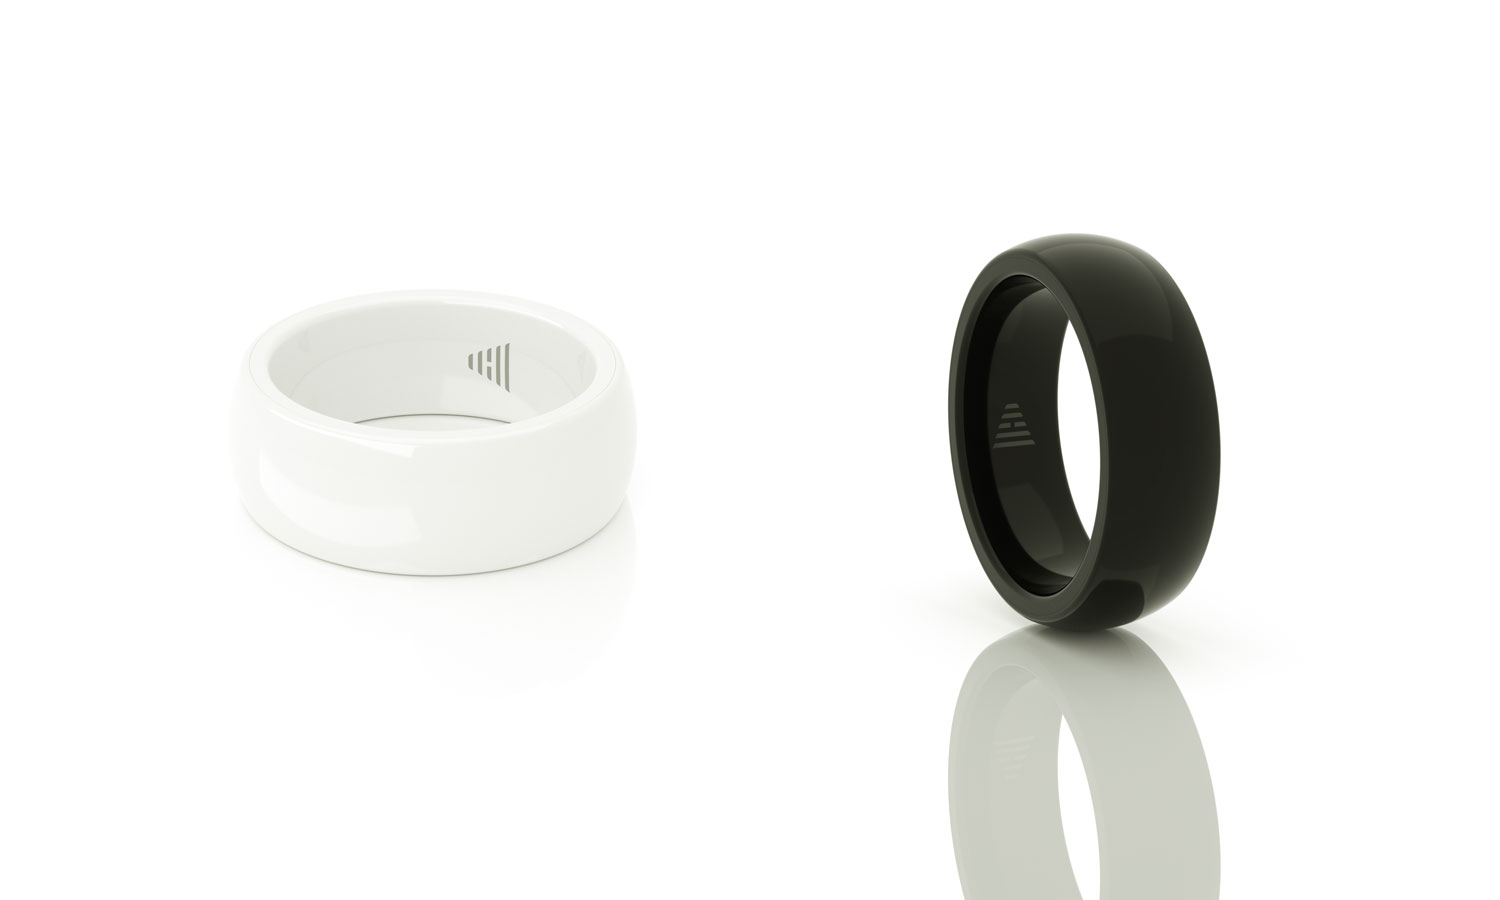 McLear's Smart Ring